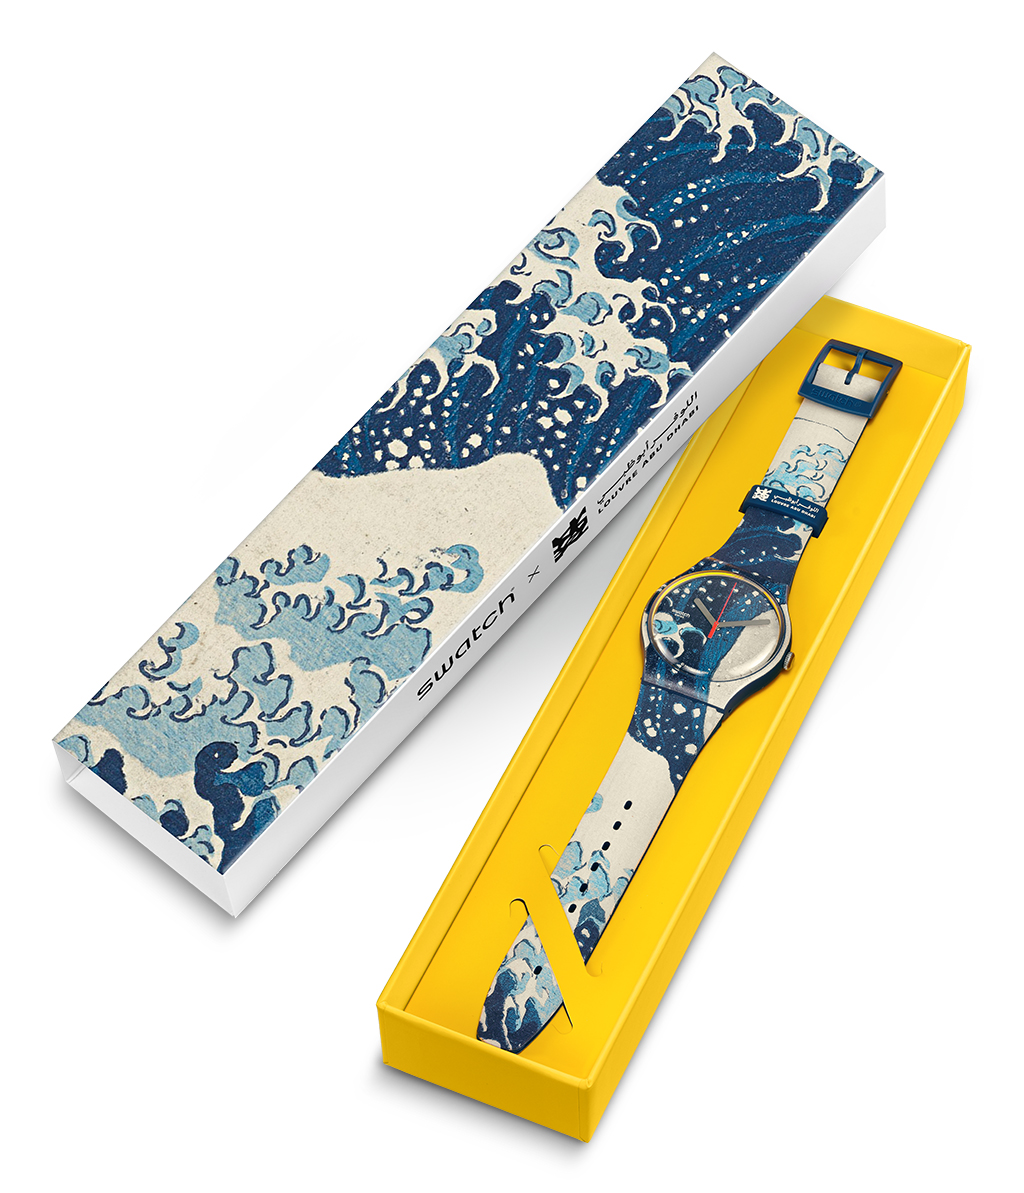 SWATCH THE GREAT WAVE BY HOKUSAI & ASTROLABE lifestyle